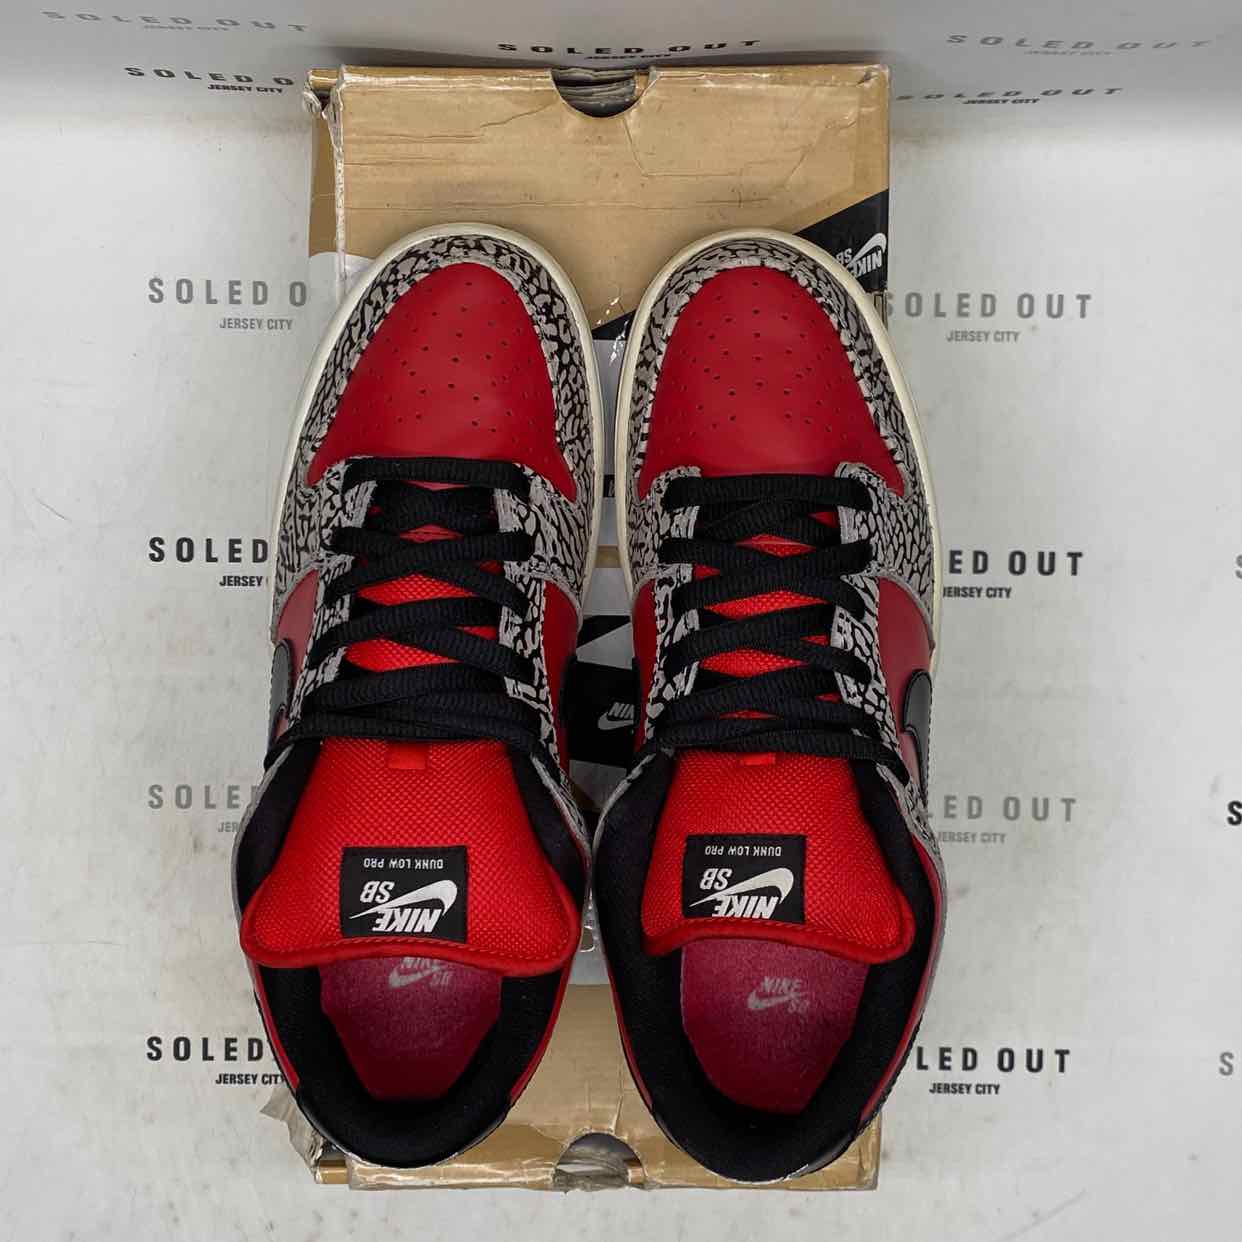 Nike SB Dunk Low "Supreme Red Cement" 2012 Used Size 9